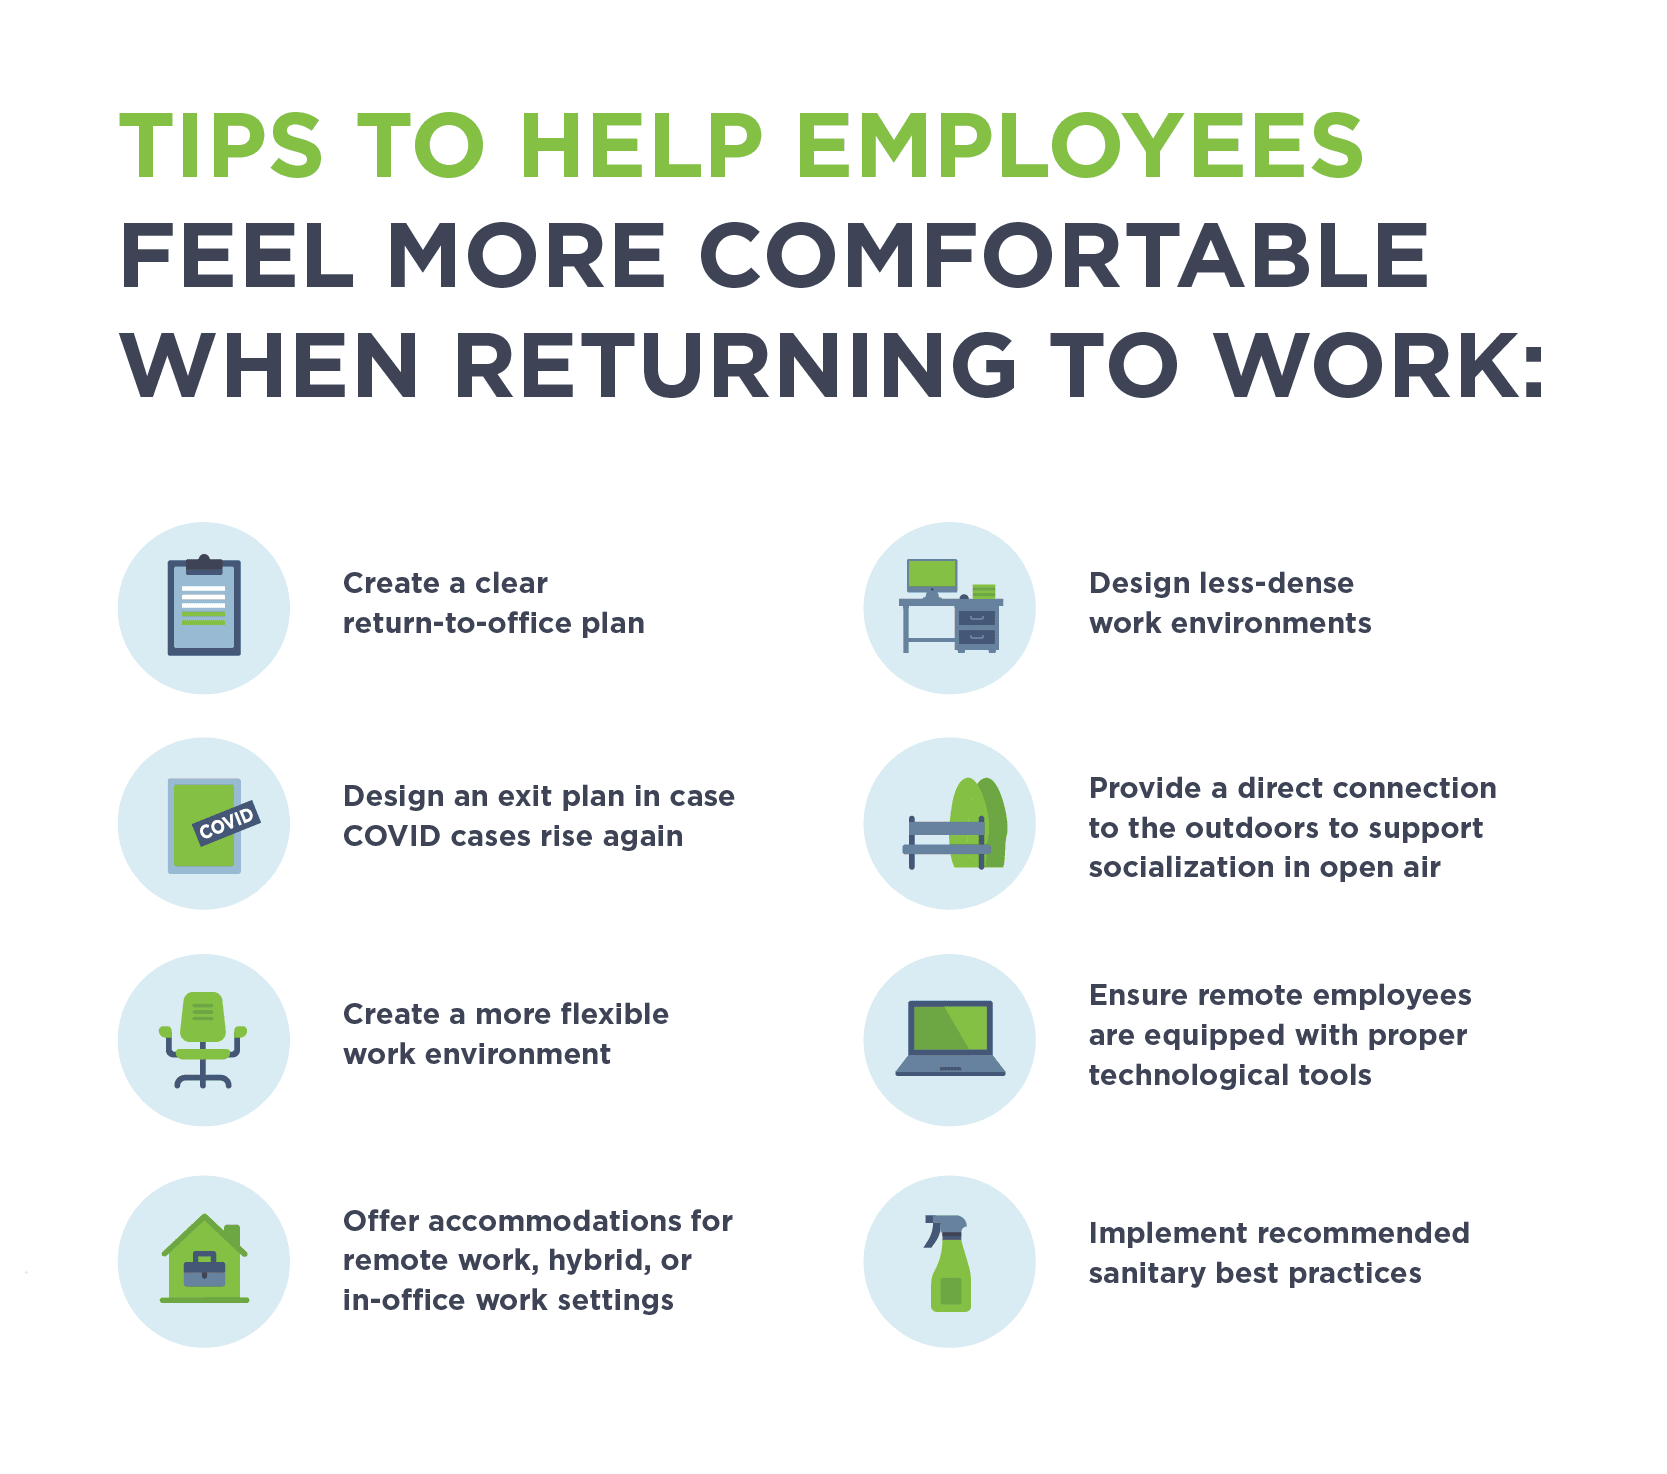 List of 8 tips to help employees feel more comfortable when returning to work.